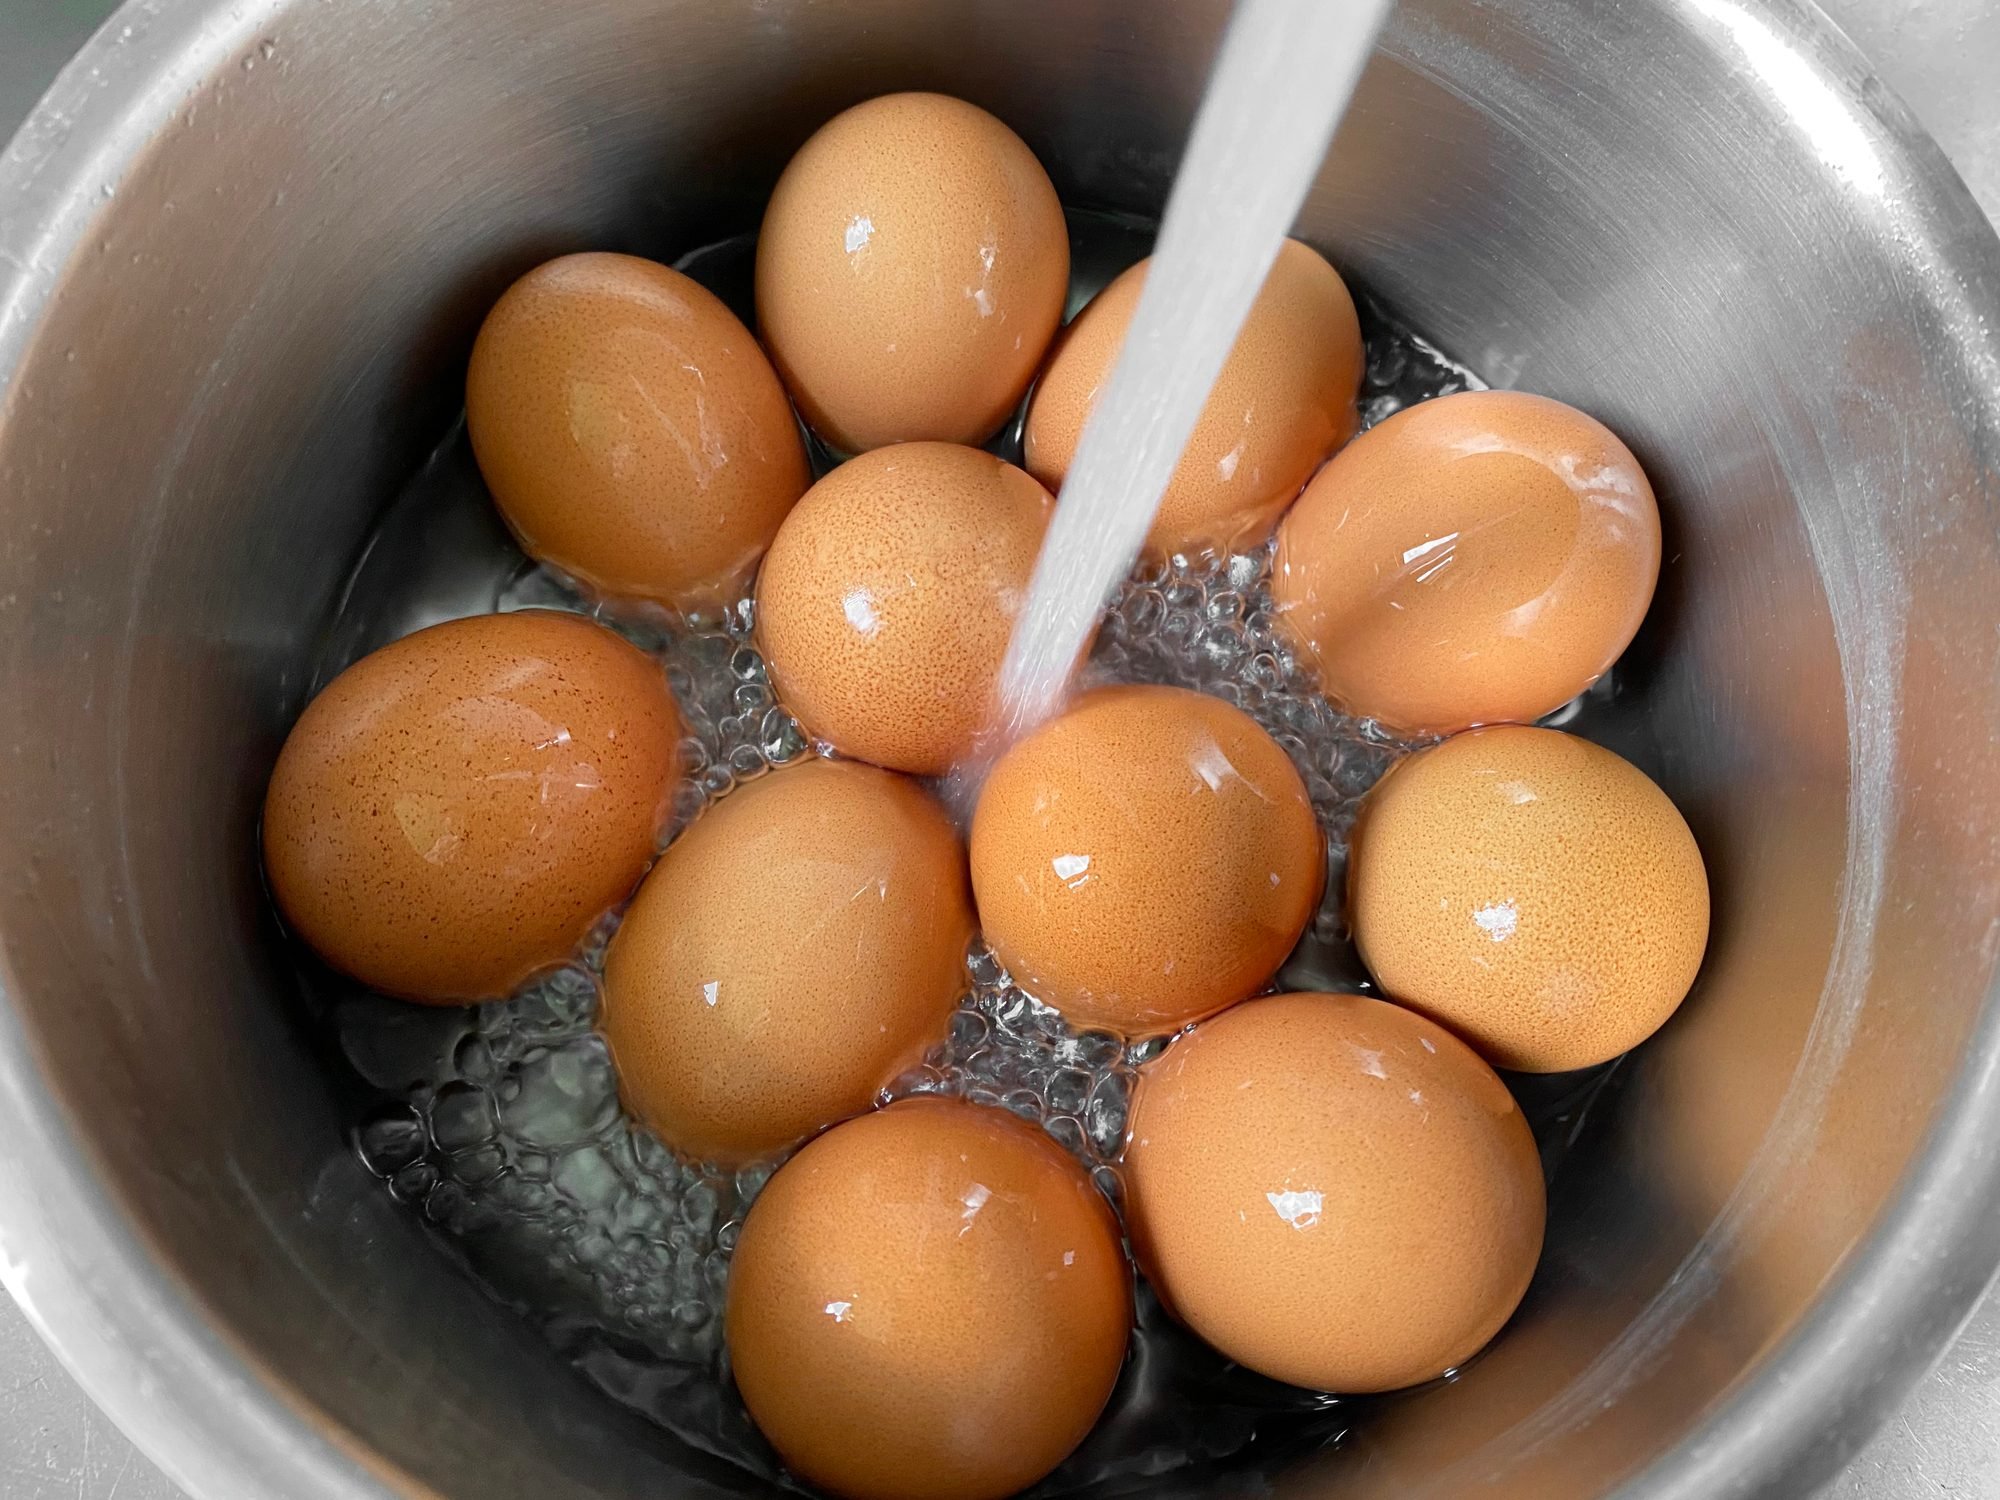 When And How To Wash Fresh Eggs